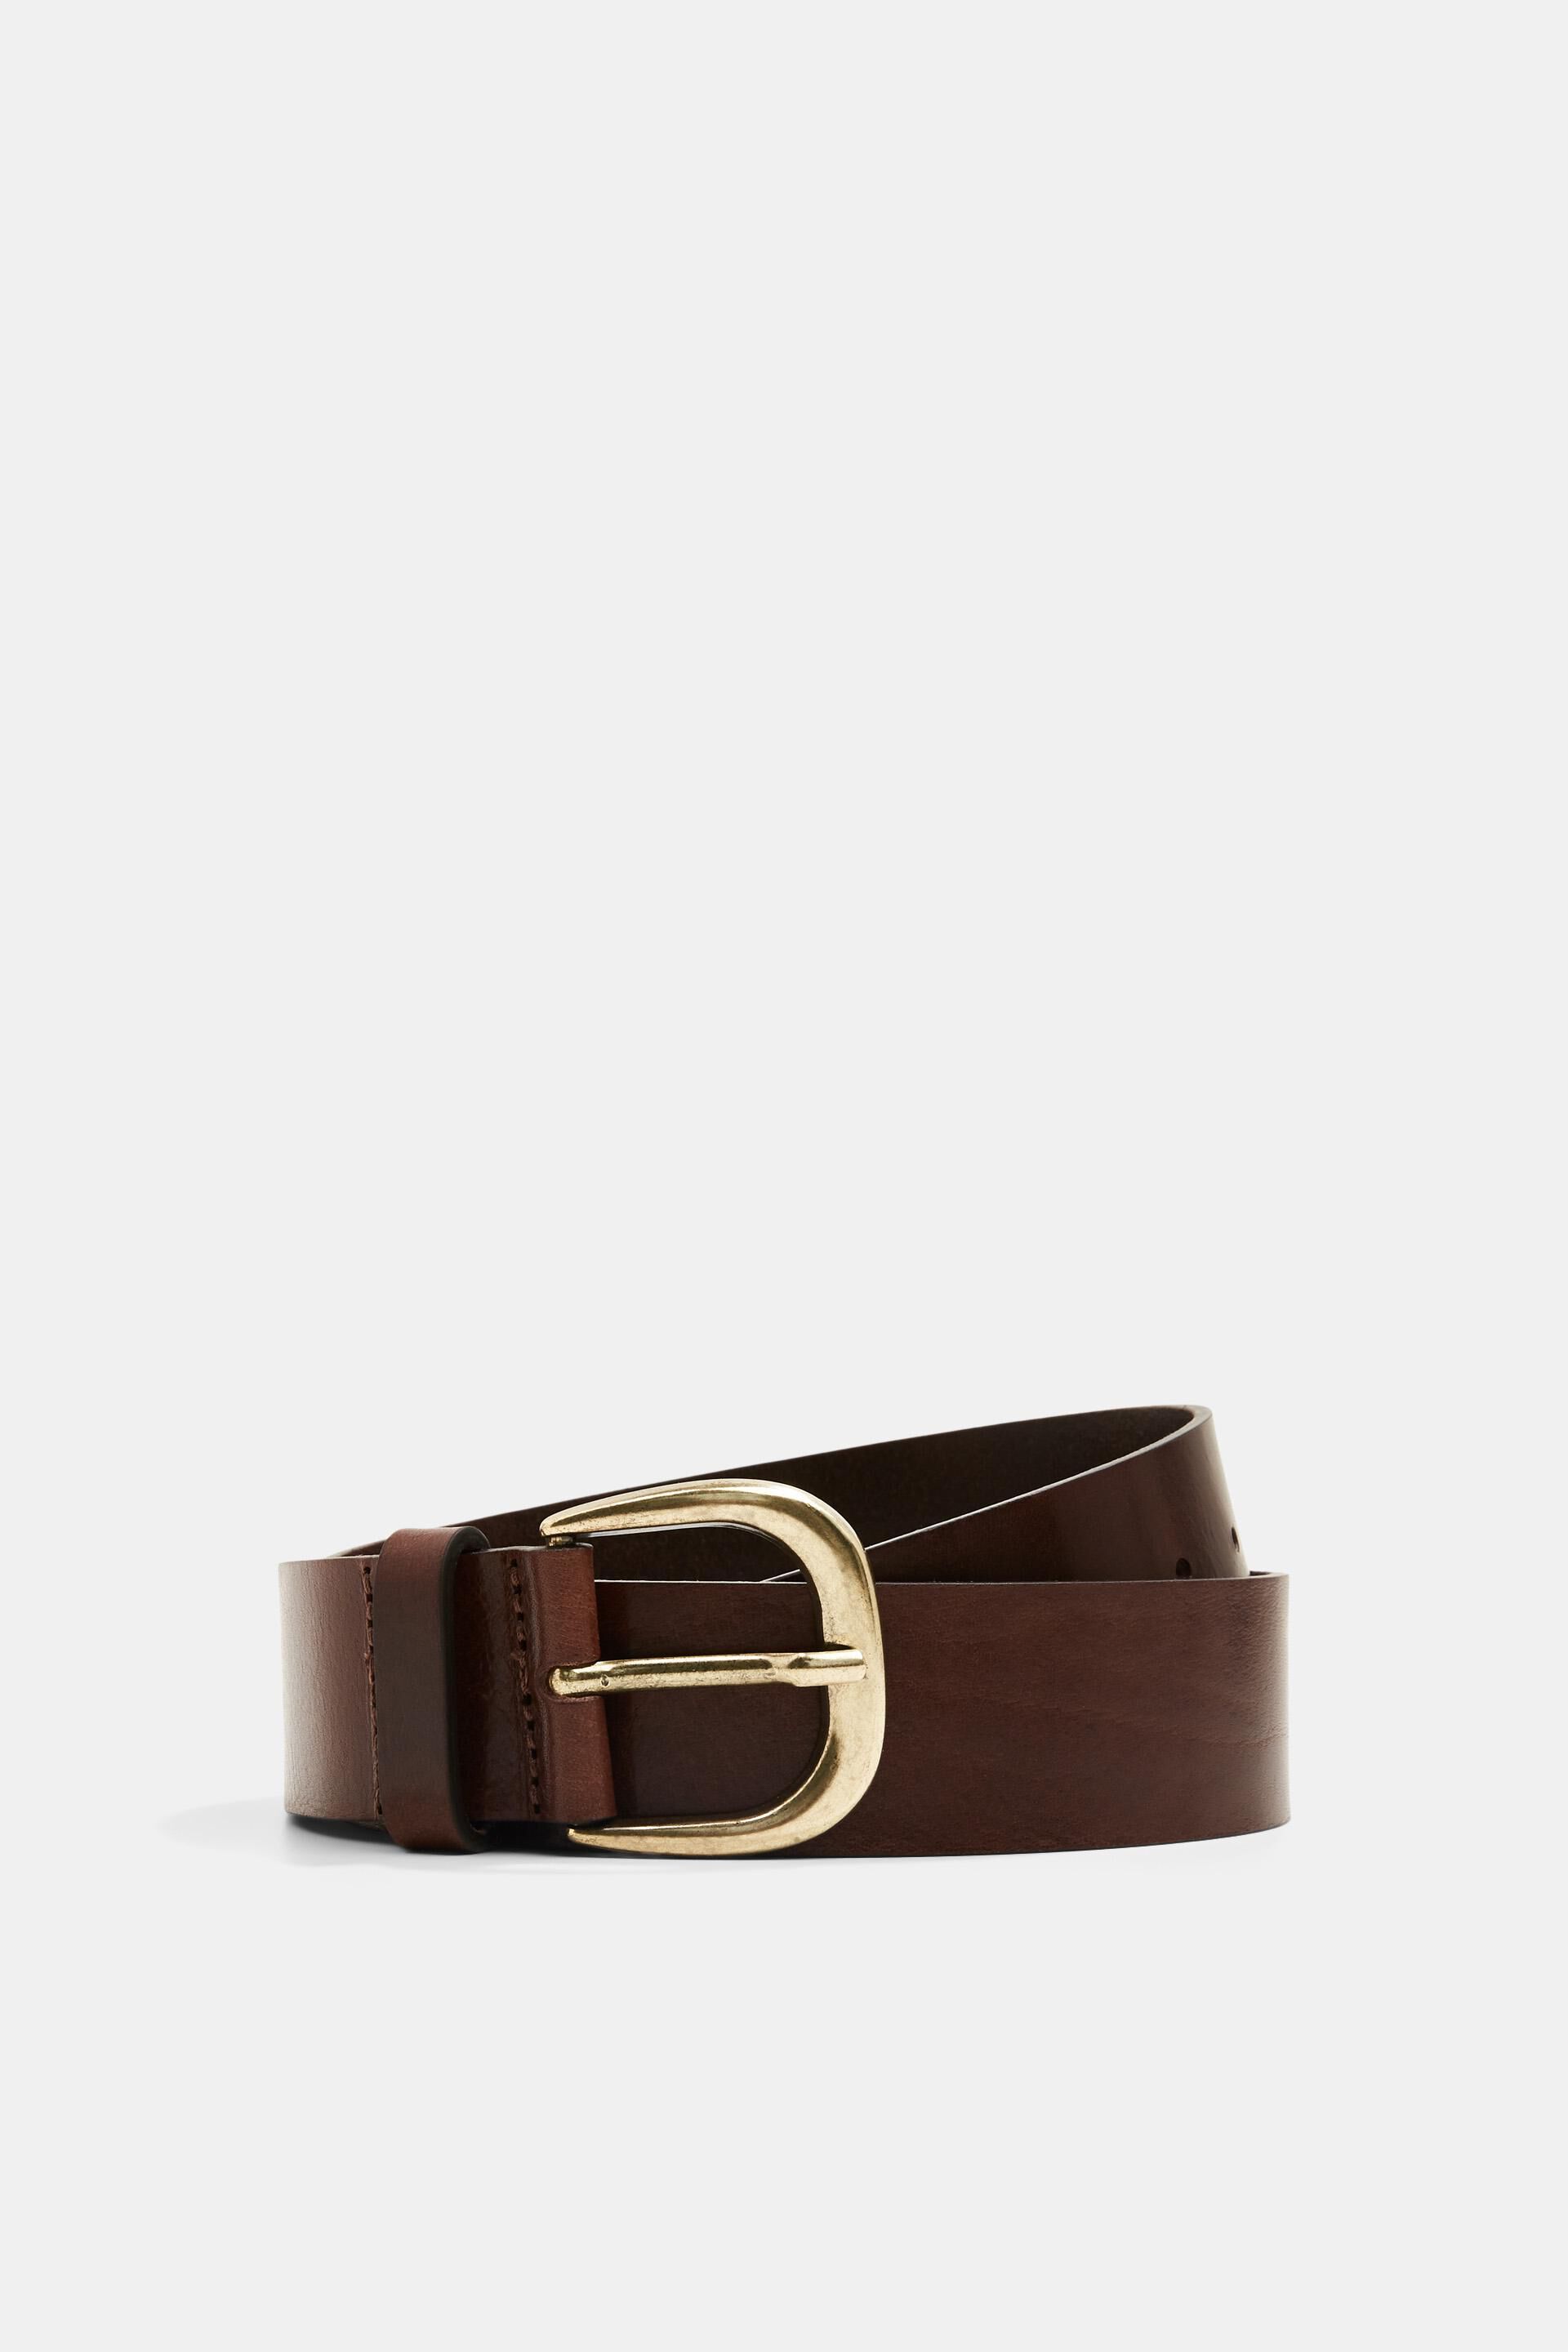 Esprit buckle pin belt with Leather